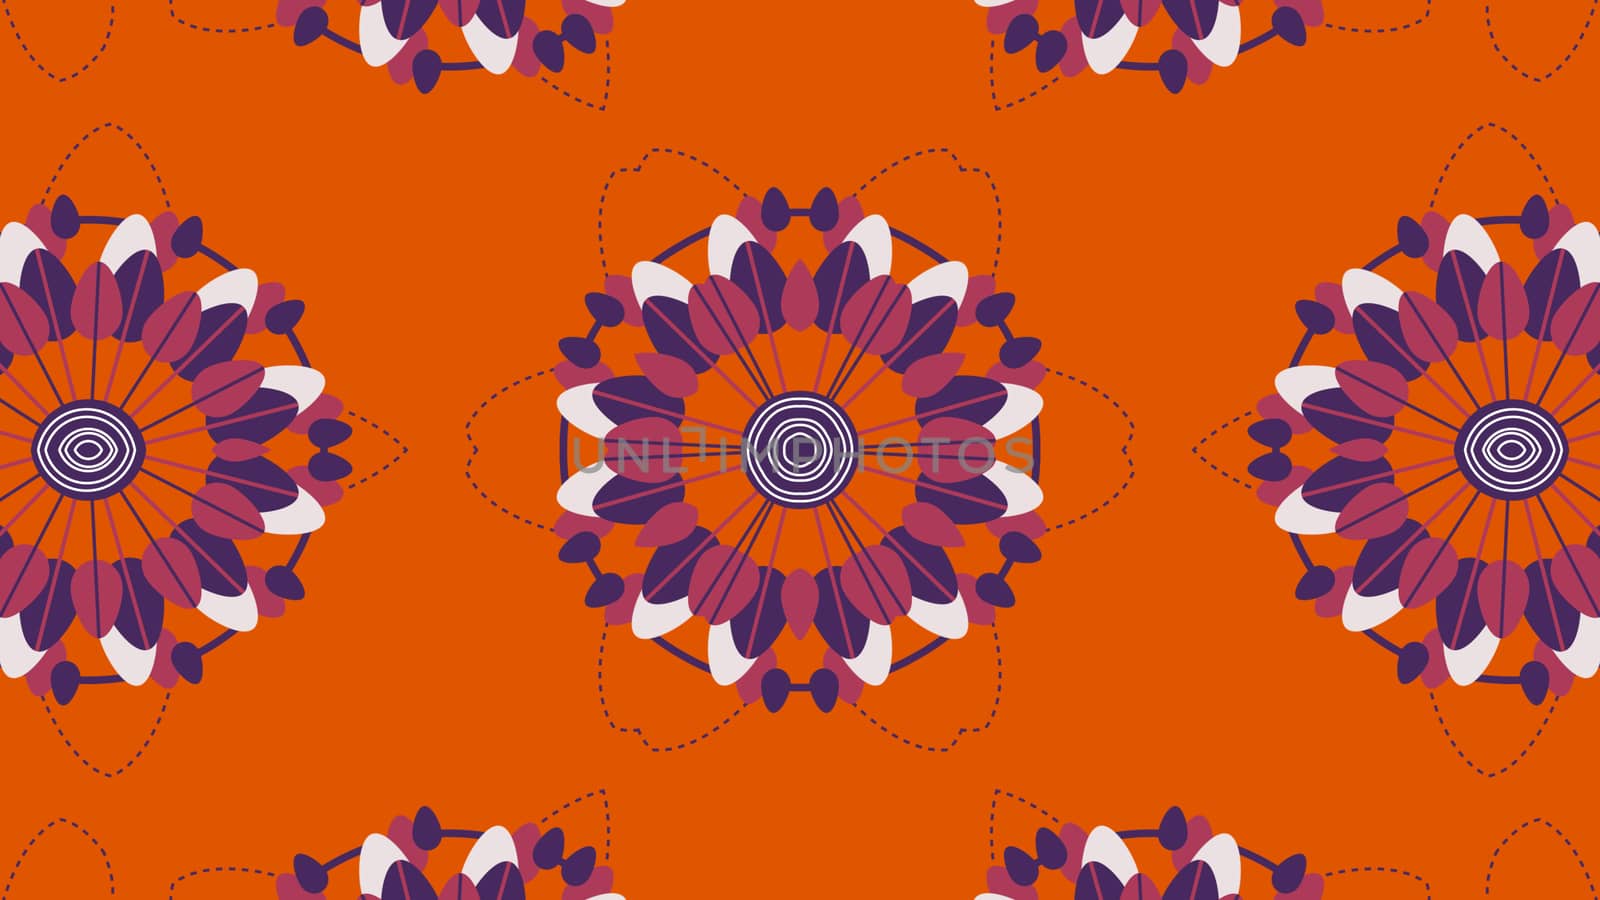 Lovely 3d illustration of white and violet tulips forming three symmetric and round circles in the orange background. They look cheery, fine and arty.